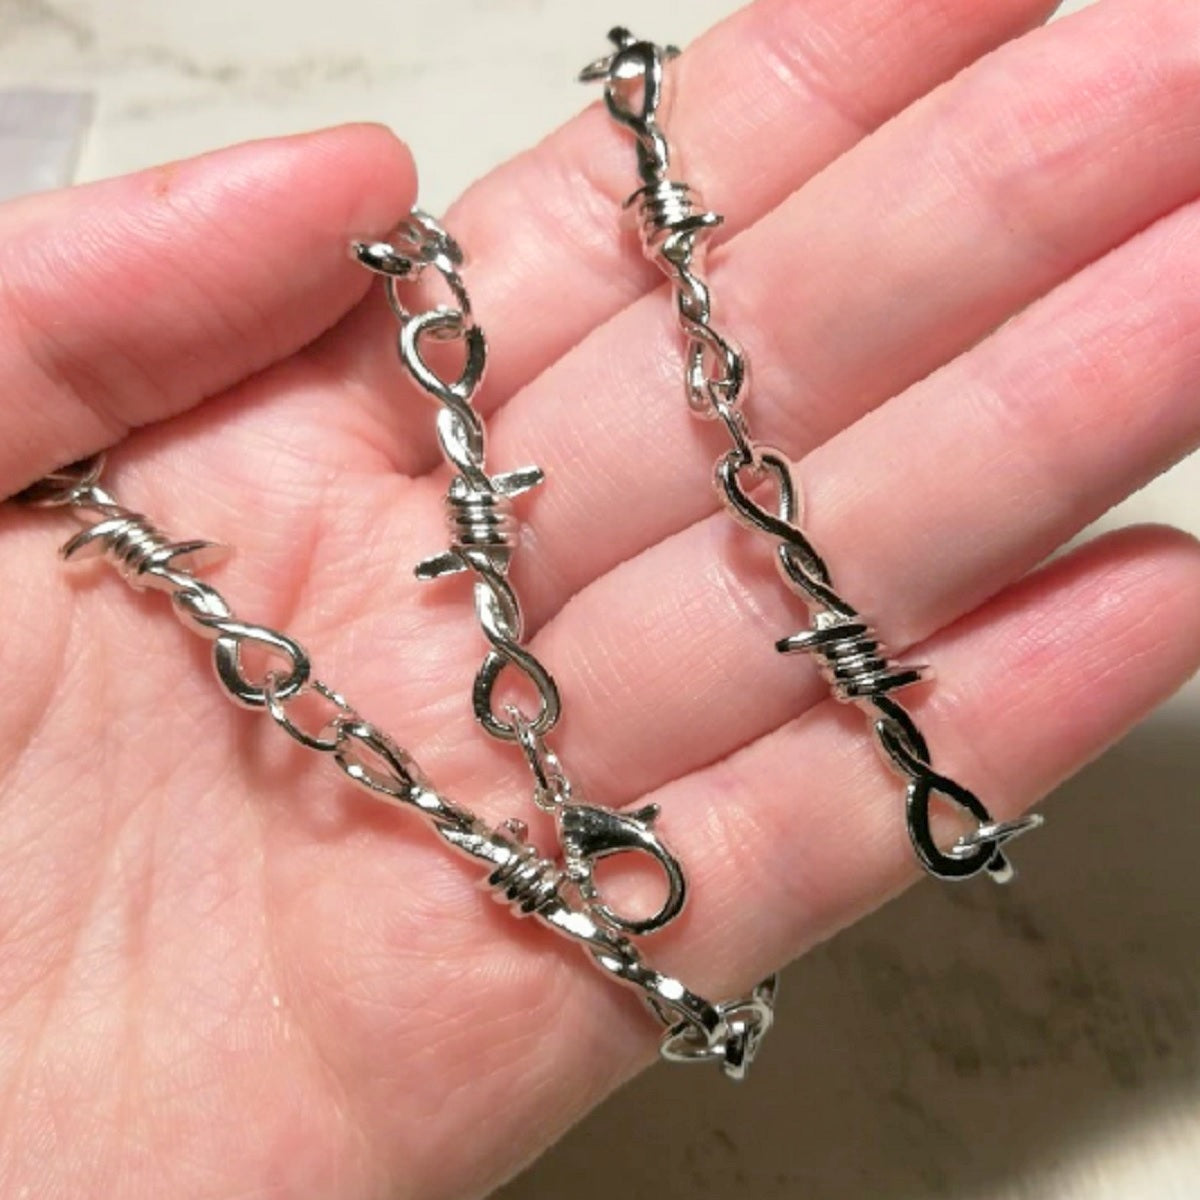 Unisex Exquisite Designed Barbed Wire Chain Necklace - Silver Coated